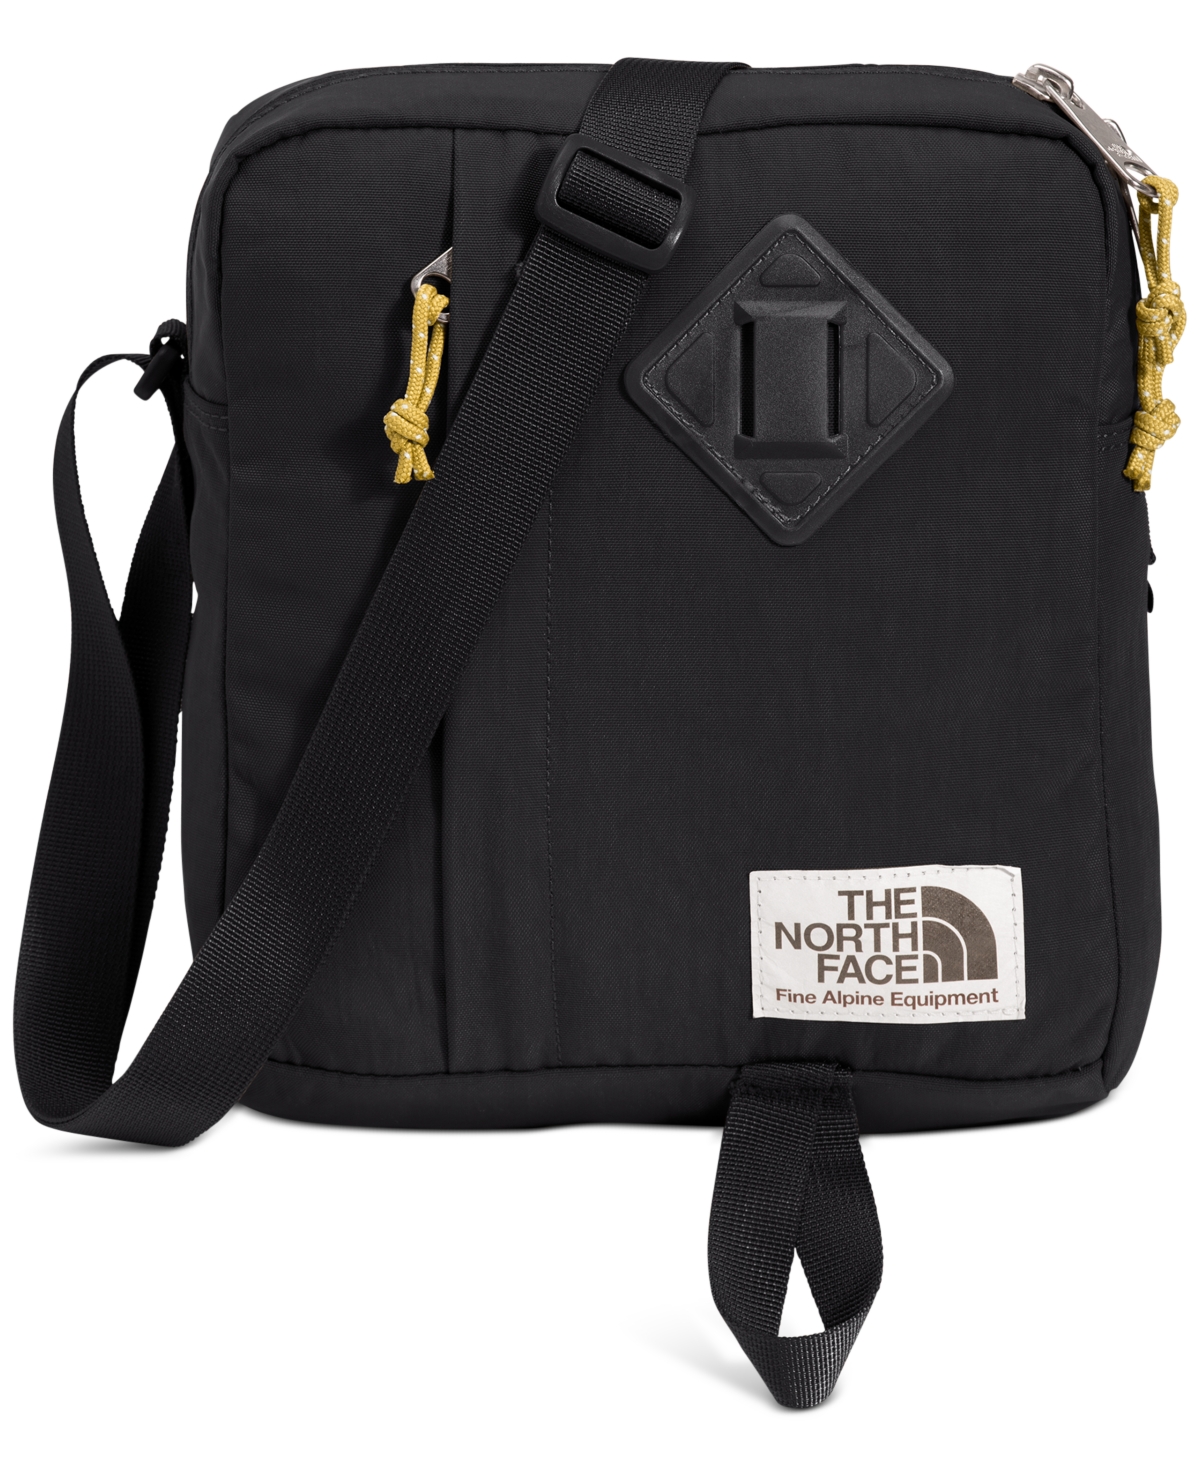 The North Face Berkeley Crossbody Bag In Tnf Black,mineral Gold